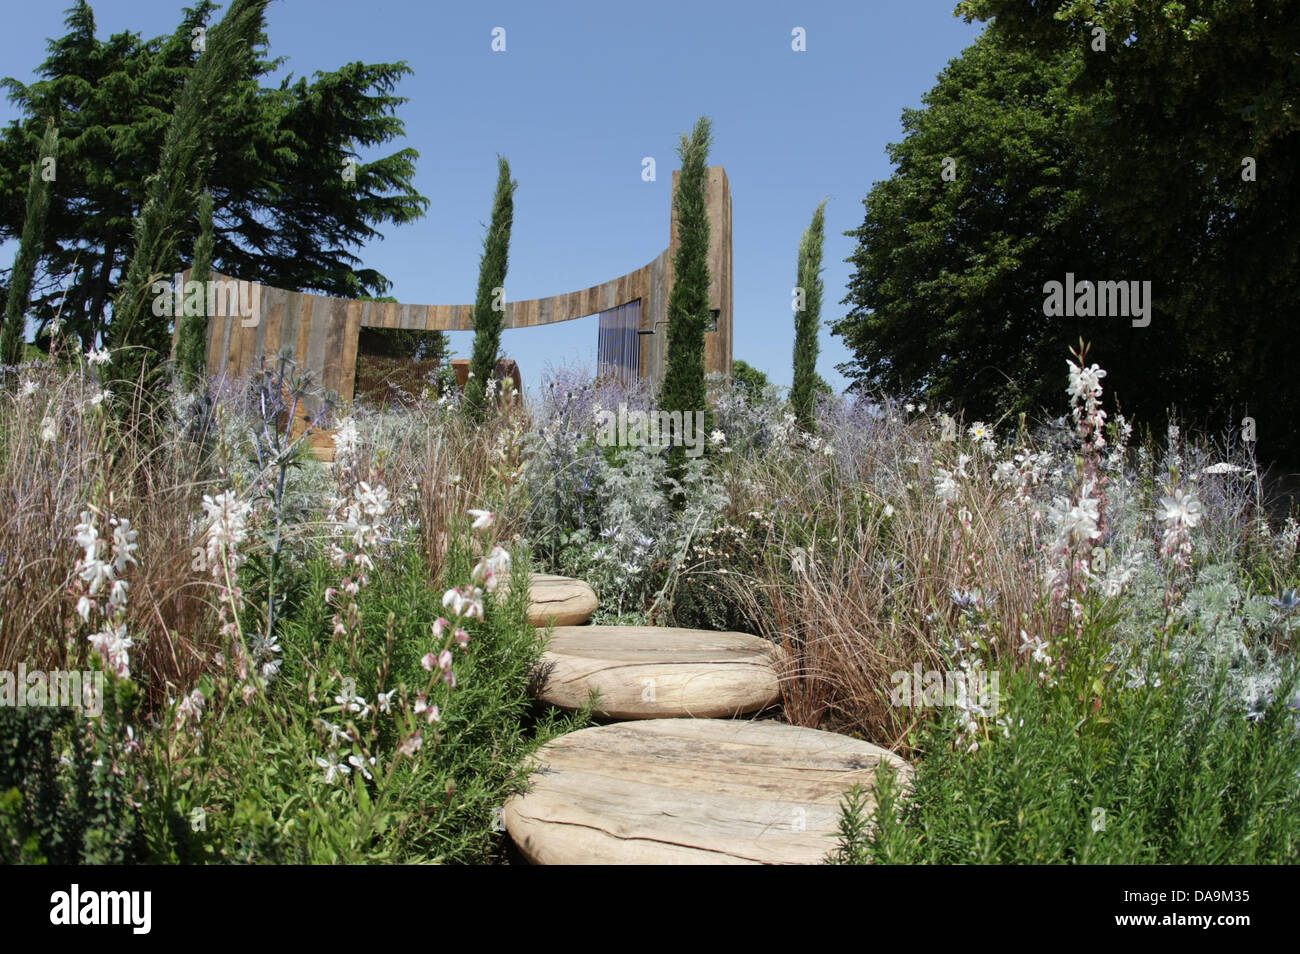 London, UK. 8th July, 2013. A Room with a View, Sponsored by RHS, Gold medal winner, Designed by Mike Harvey, Built by Arun Landscapes. RHS Hampton Court Palace Flower Show. Credit:  martyn wheatley/Alamy Live News Stock Photo